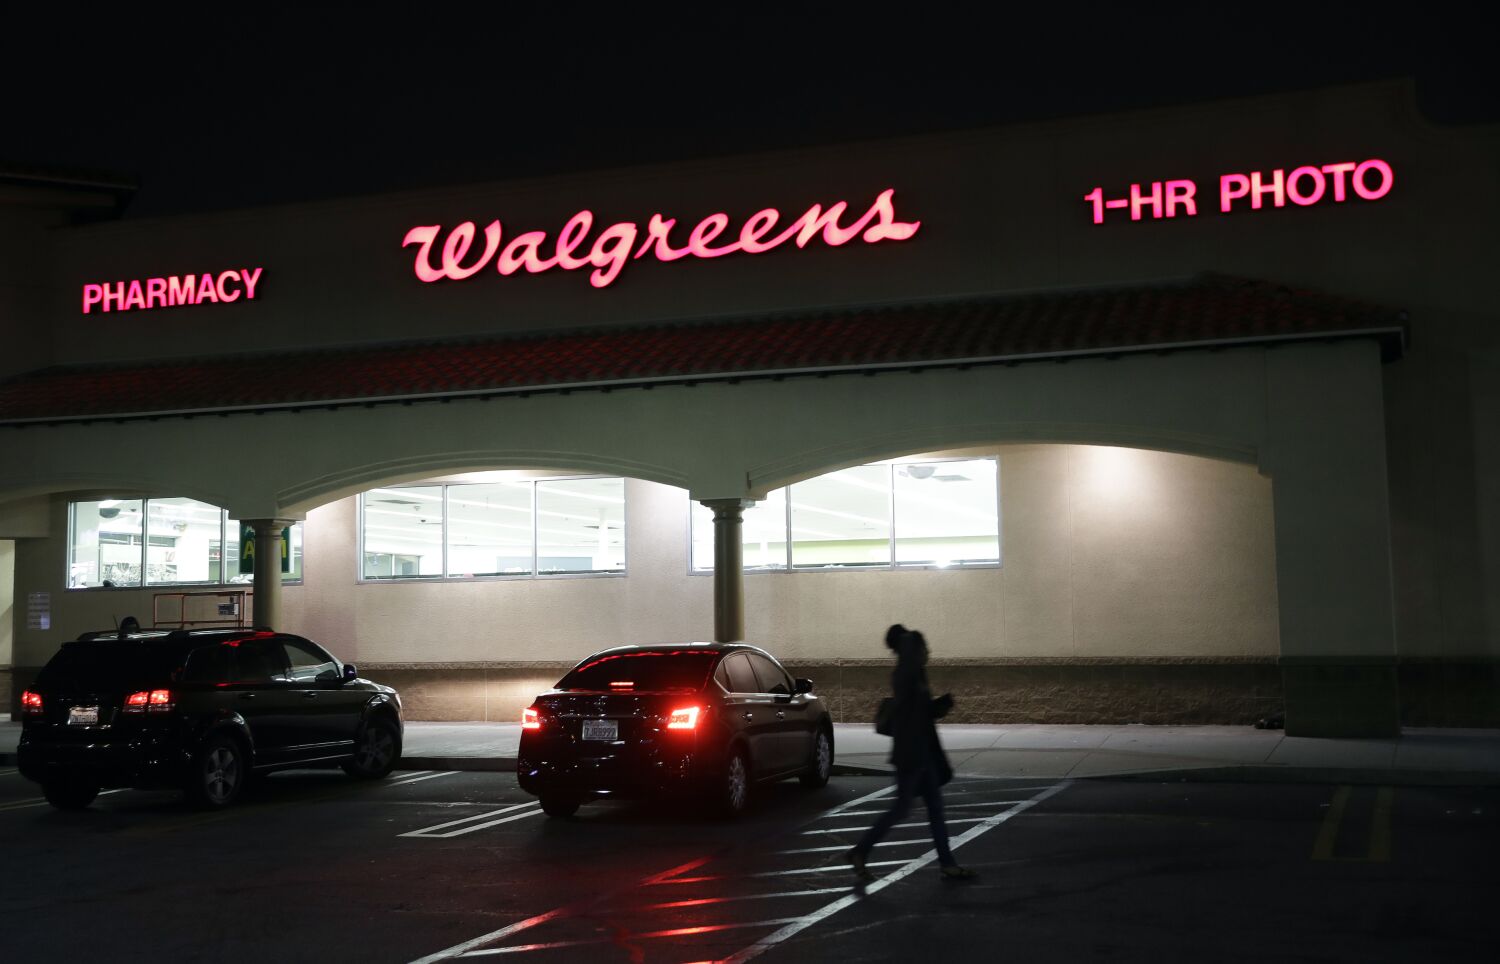 California could receive more than $500 million from Walgreens opioid settlement